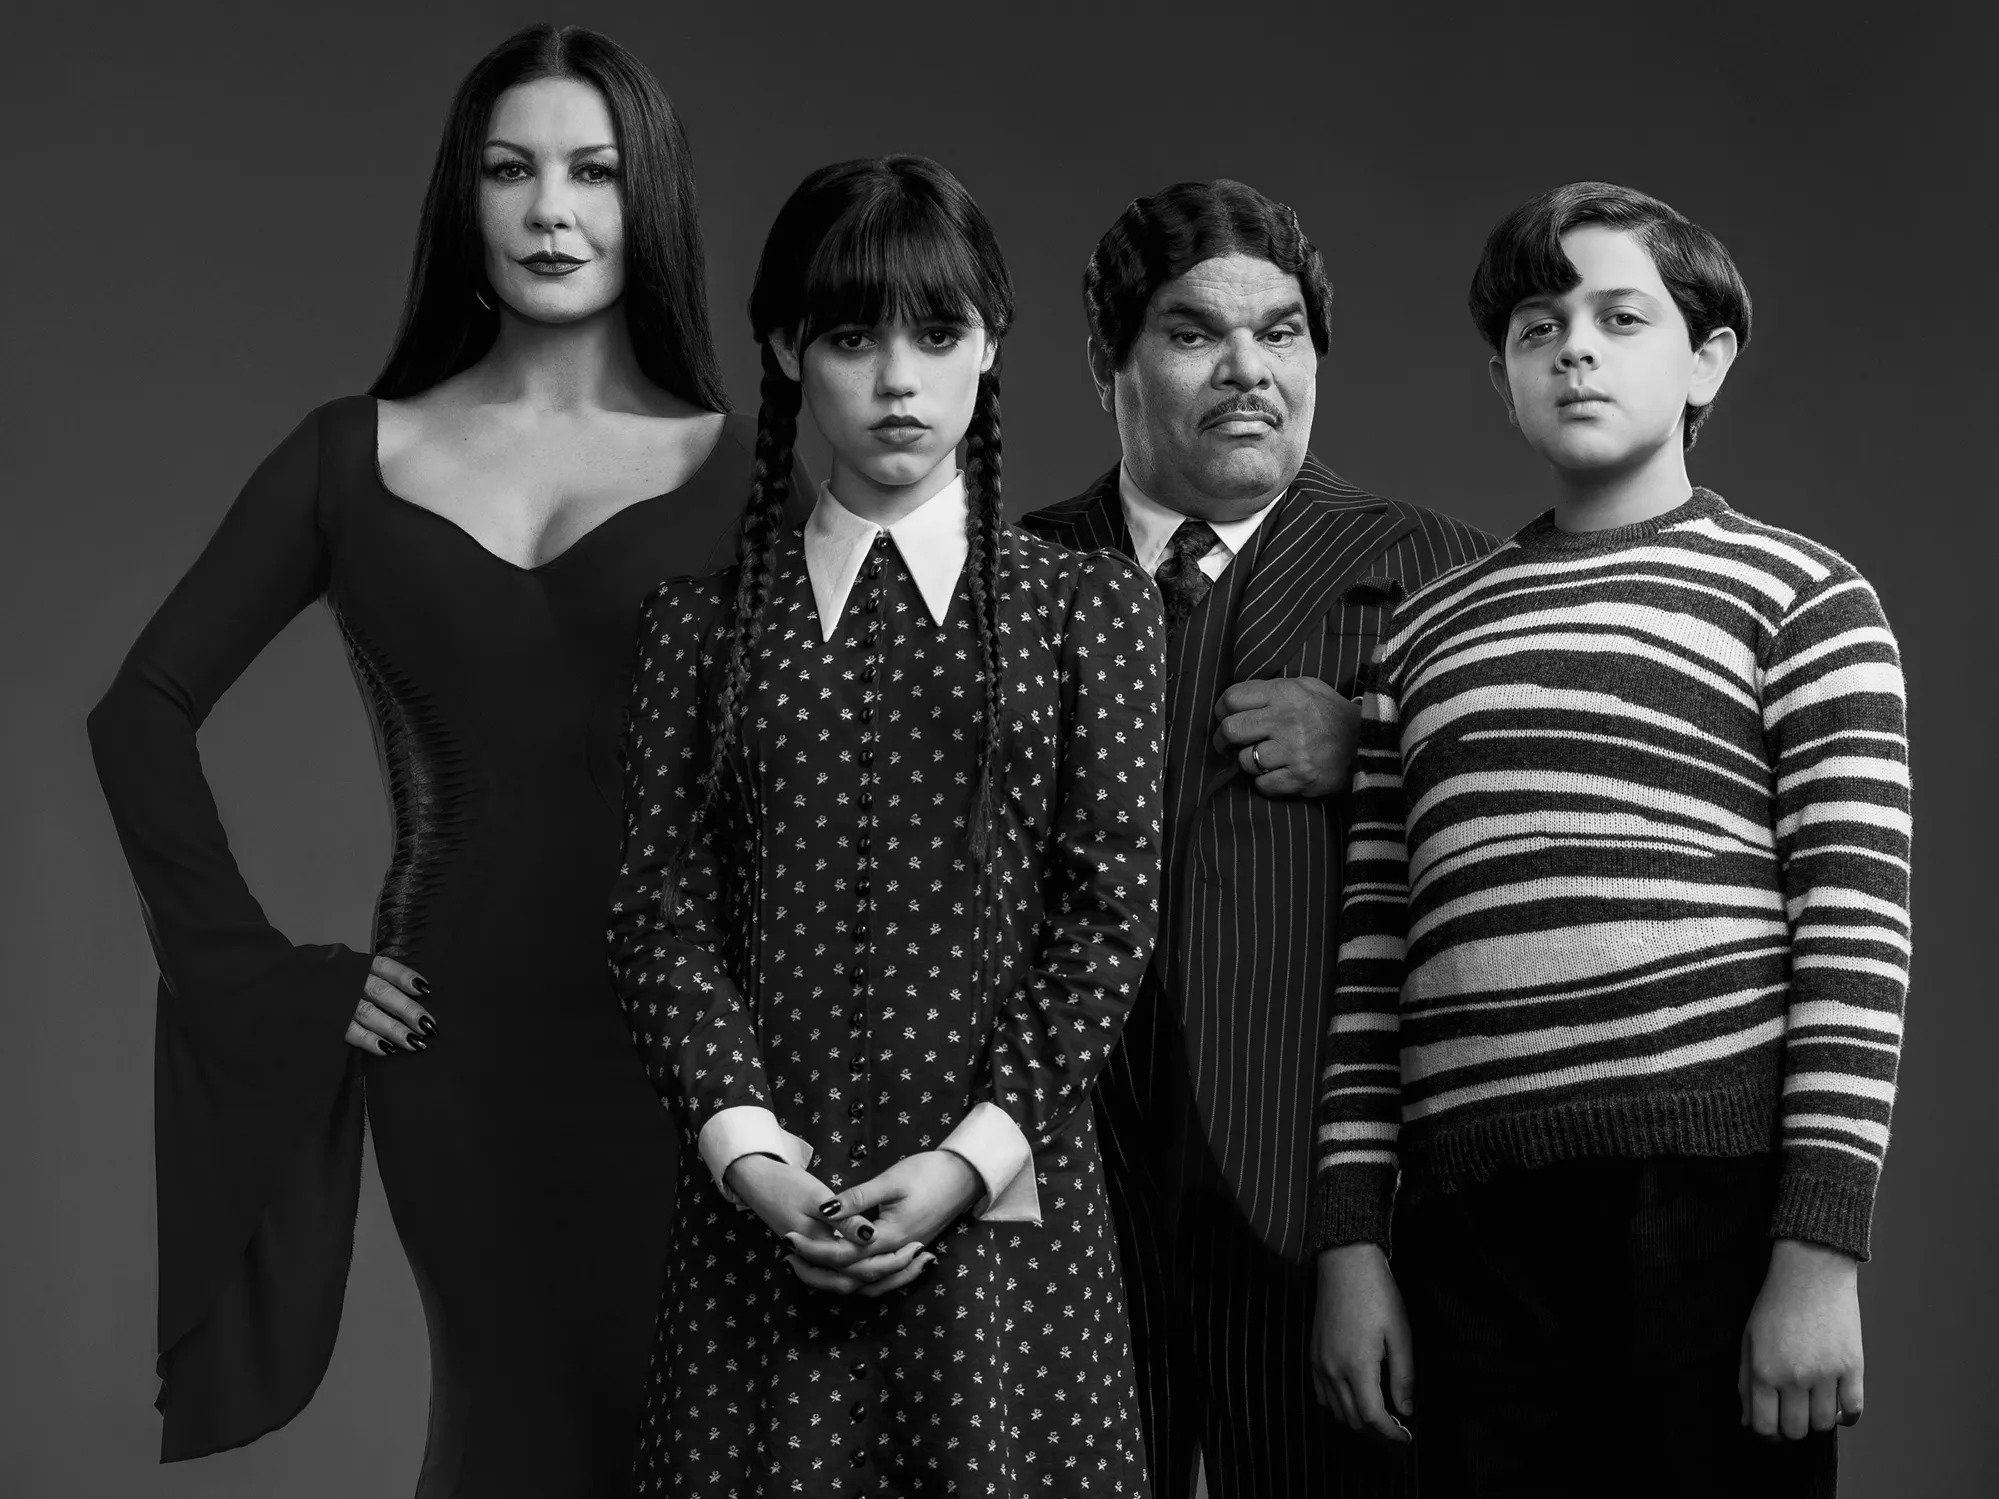 Wednesday: The New Addams Family Netflix Series By Tim Burton Does A First Look of The Cast